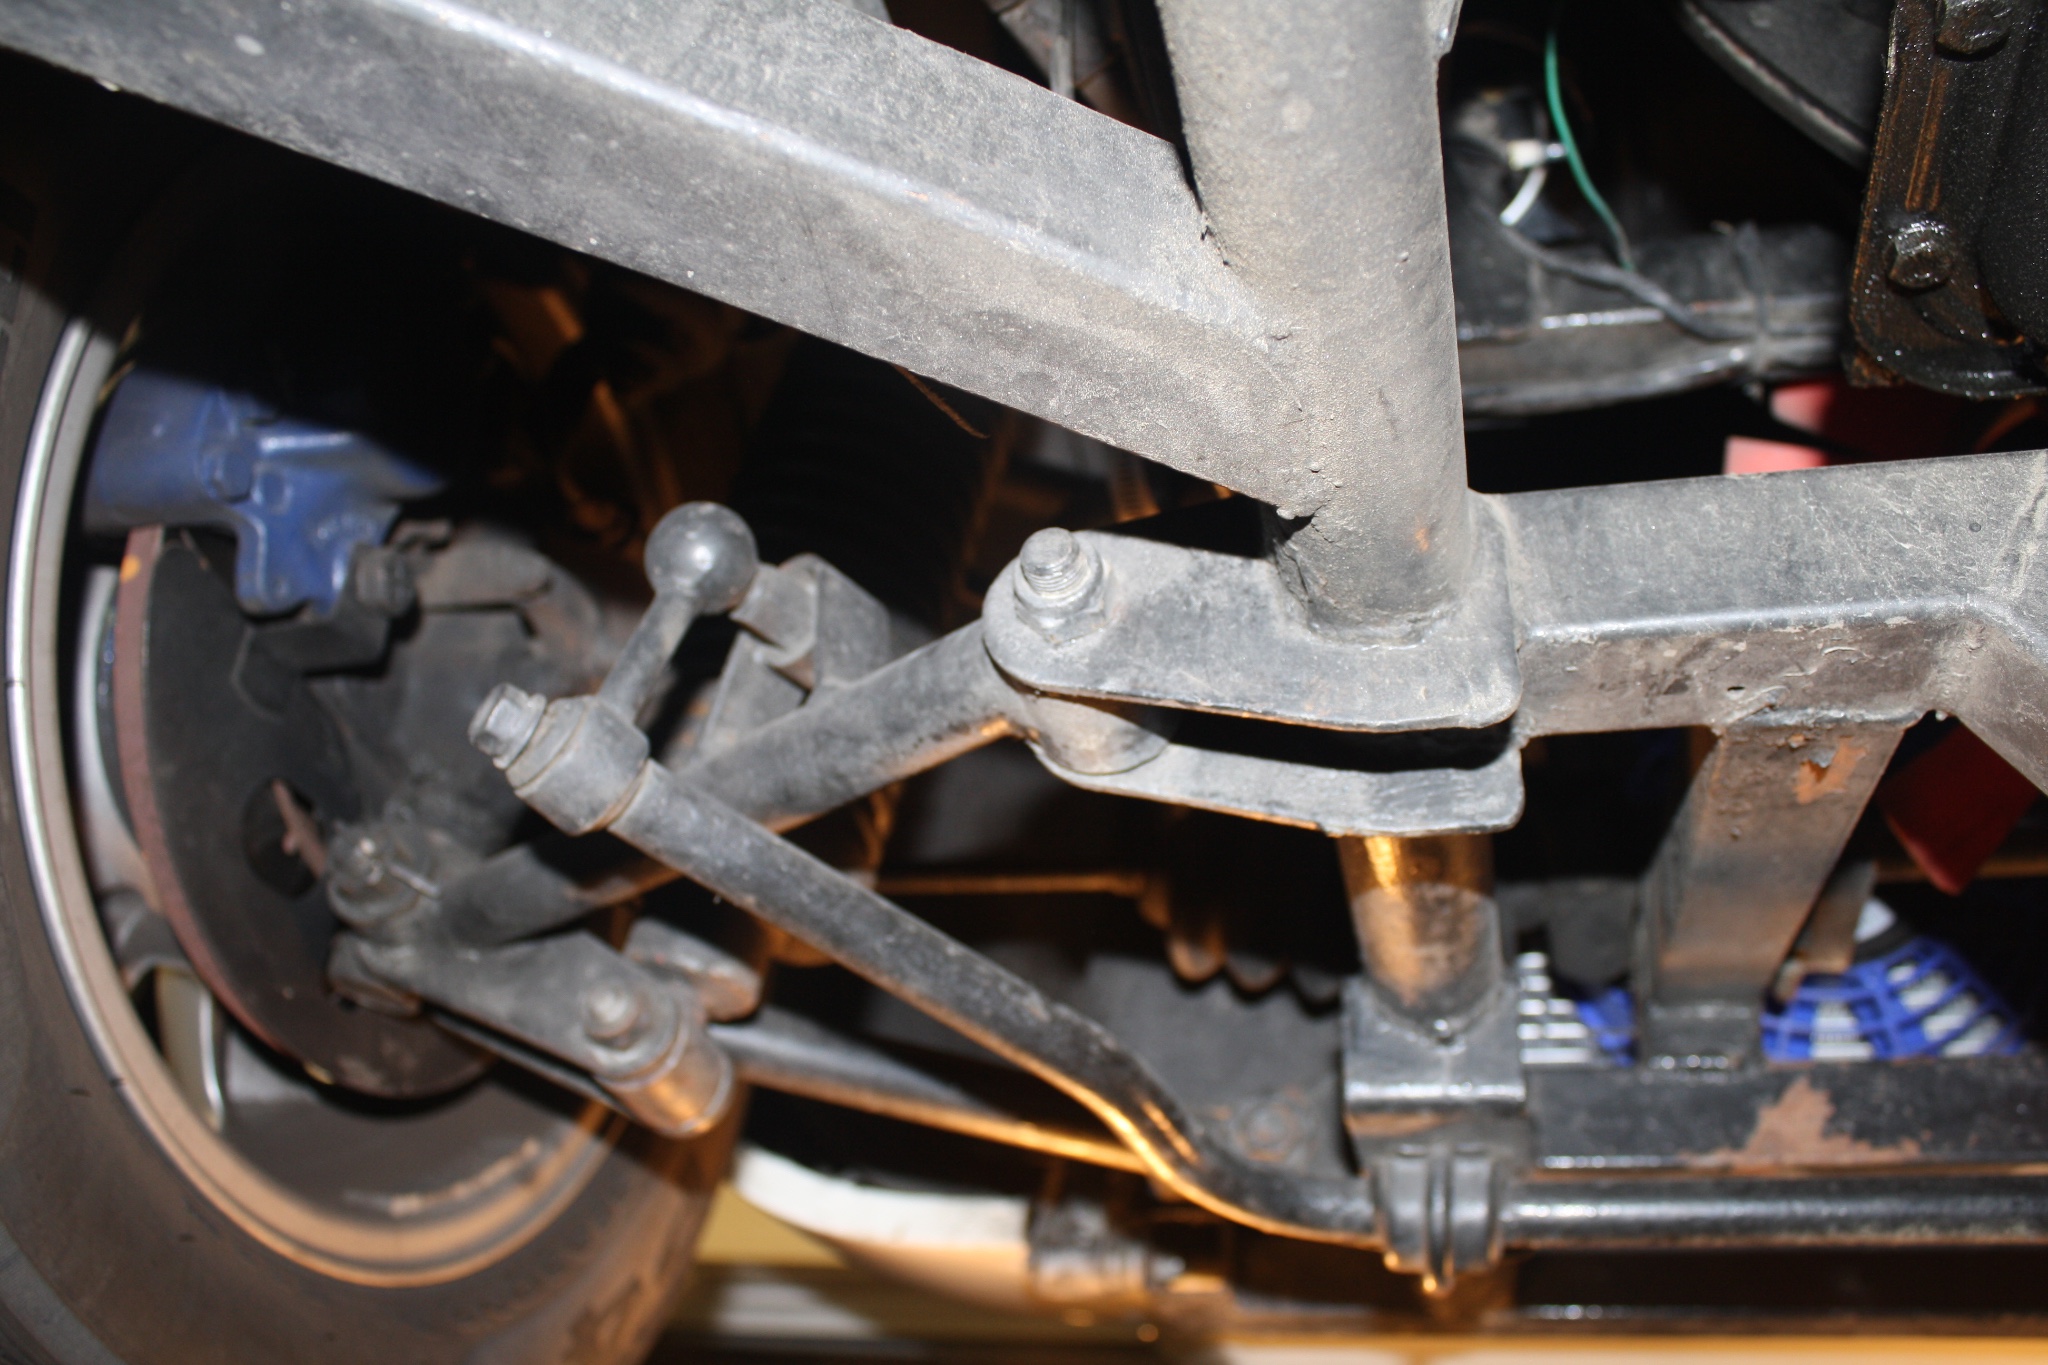 Front suspension view showing the Triumph TR6 11" disc brake and giving an idea of chassis construction.